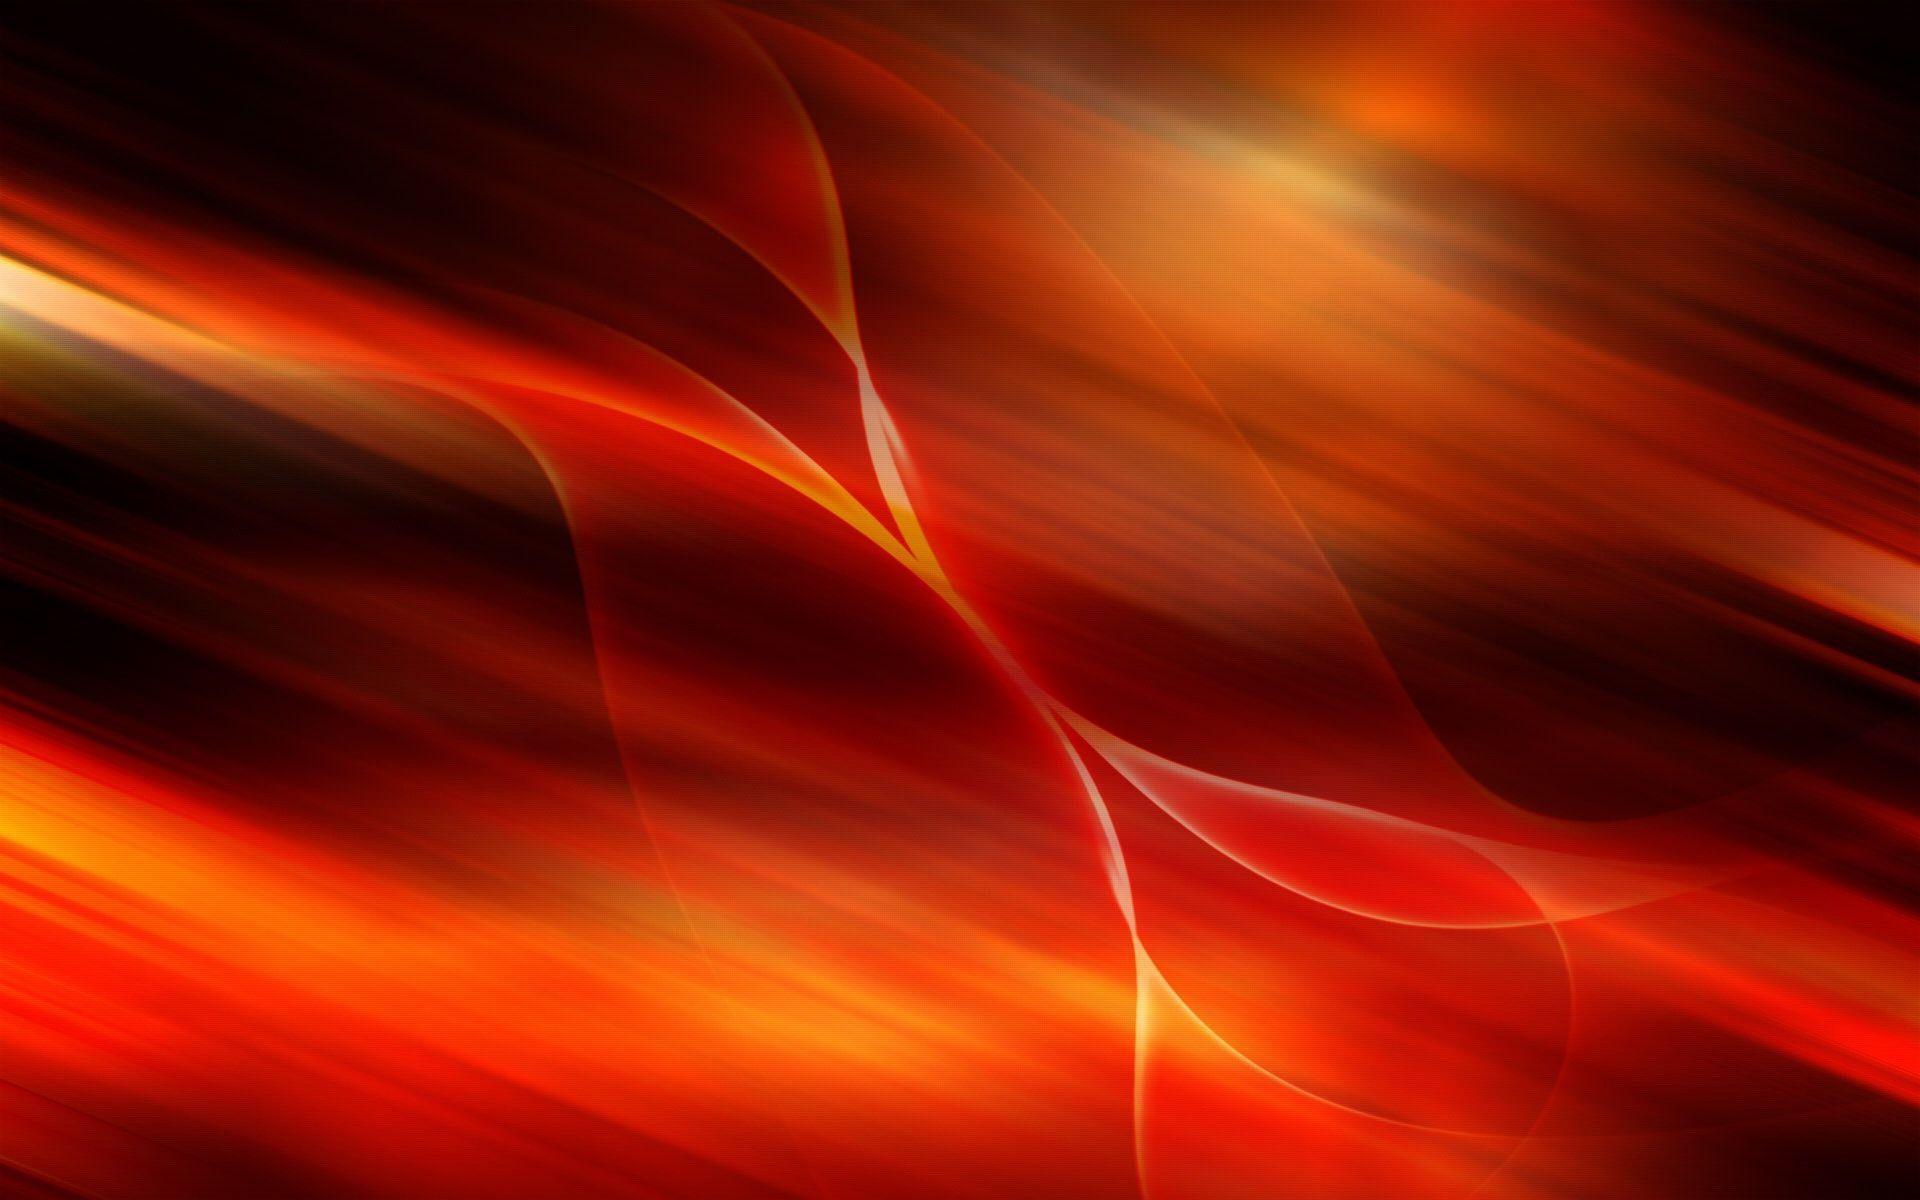 Black And Red Fire Wallpapers